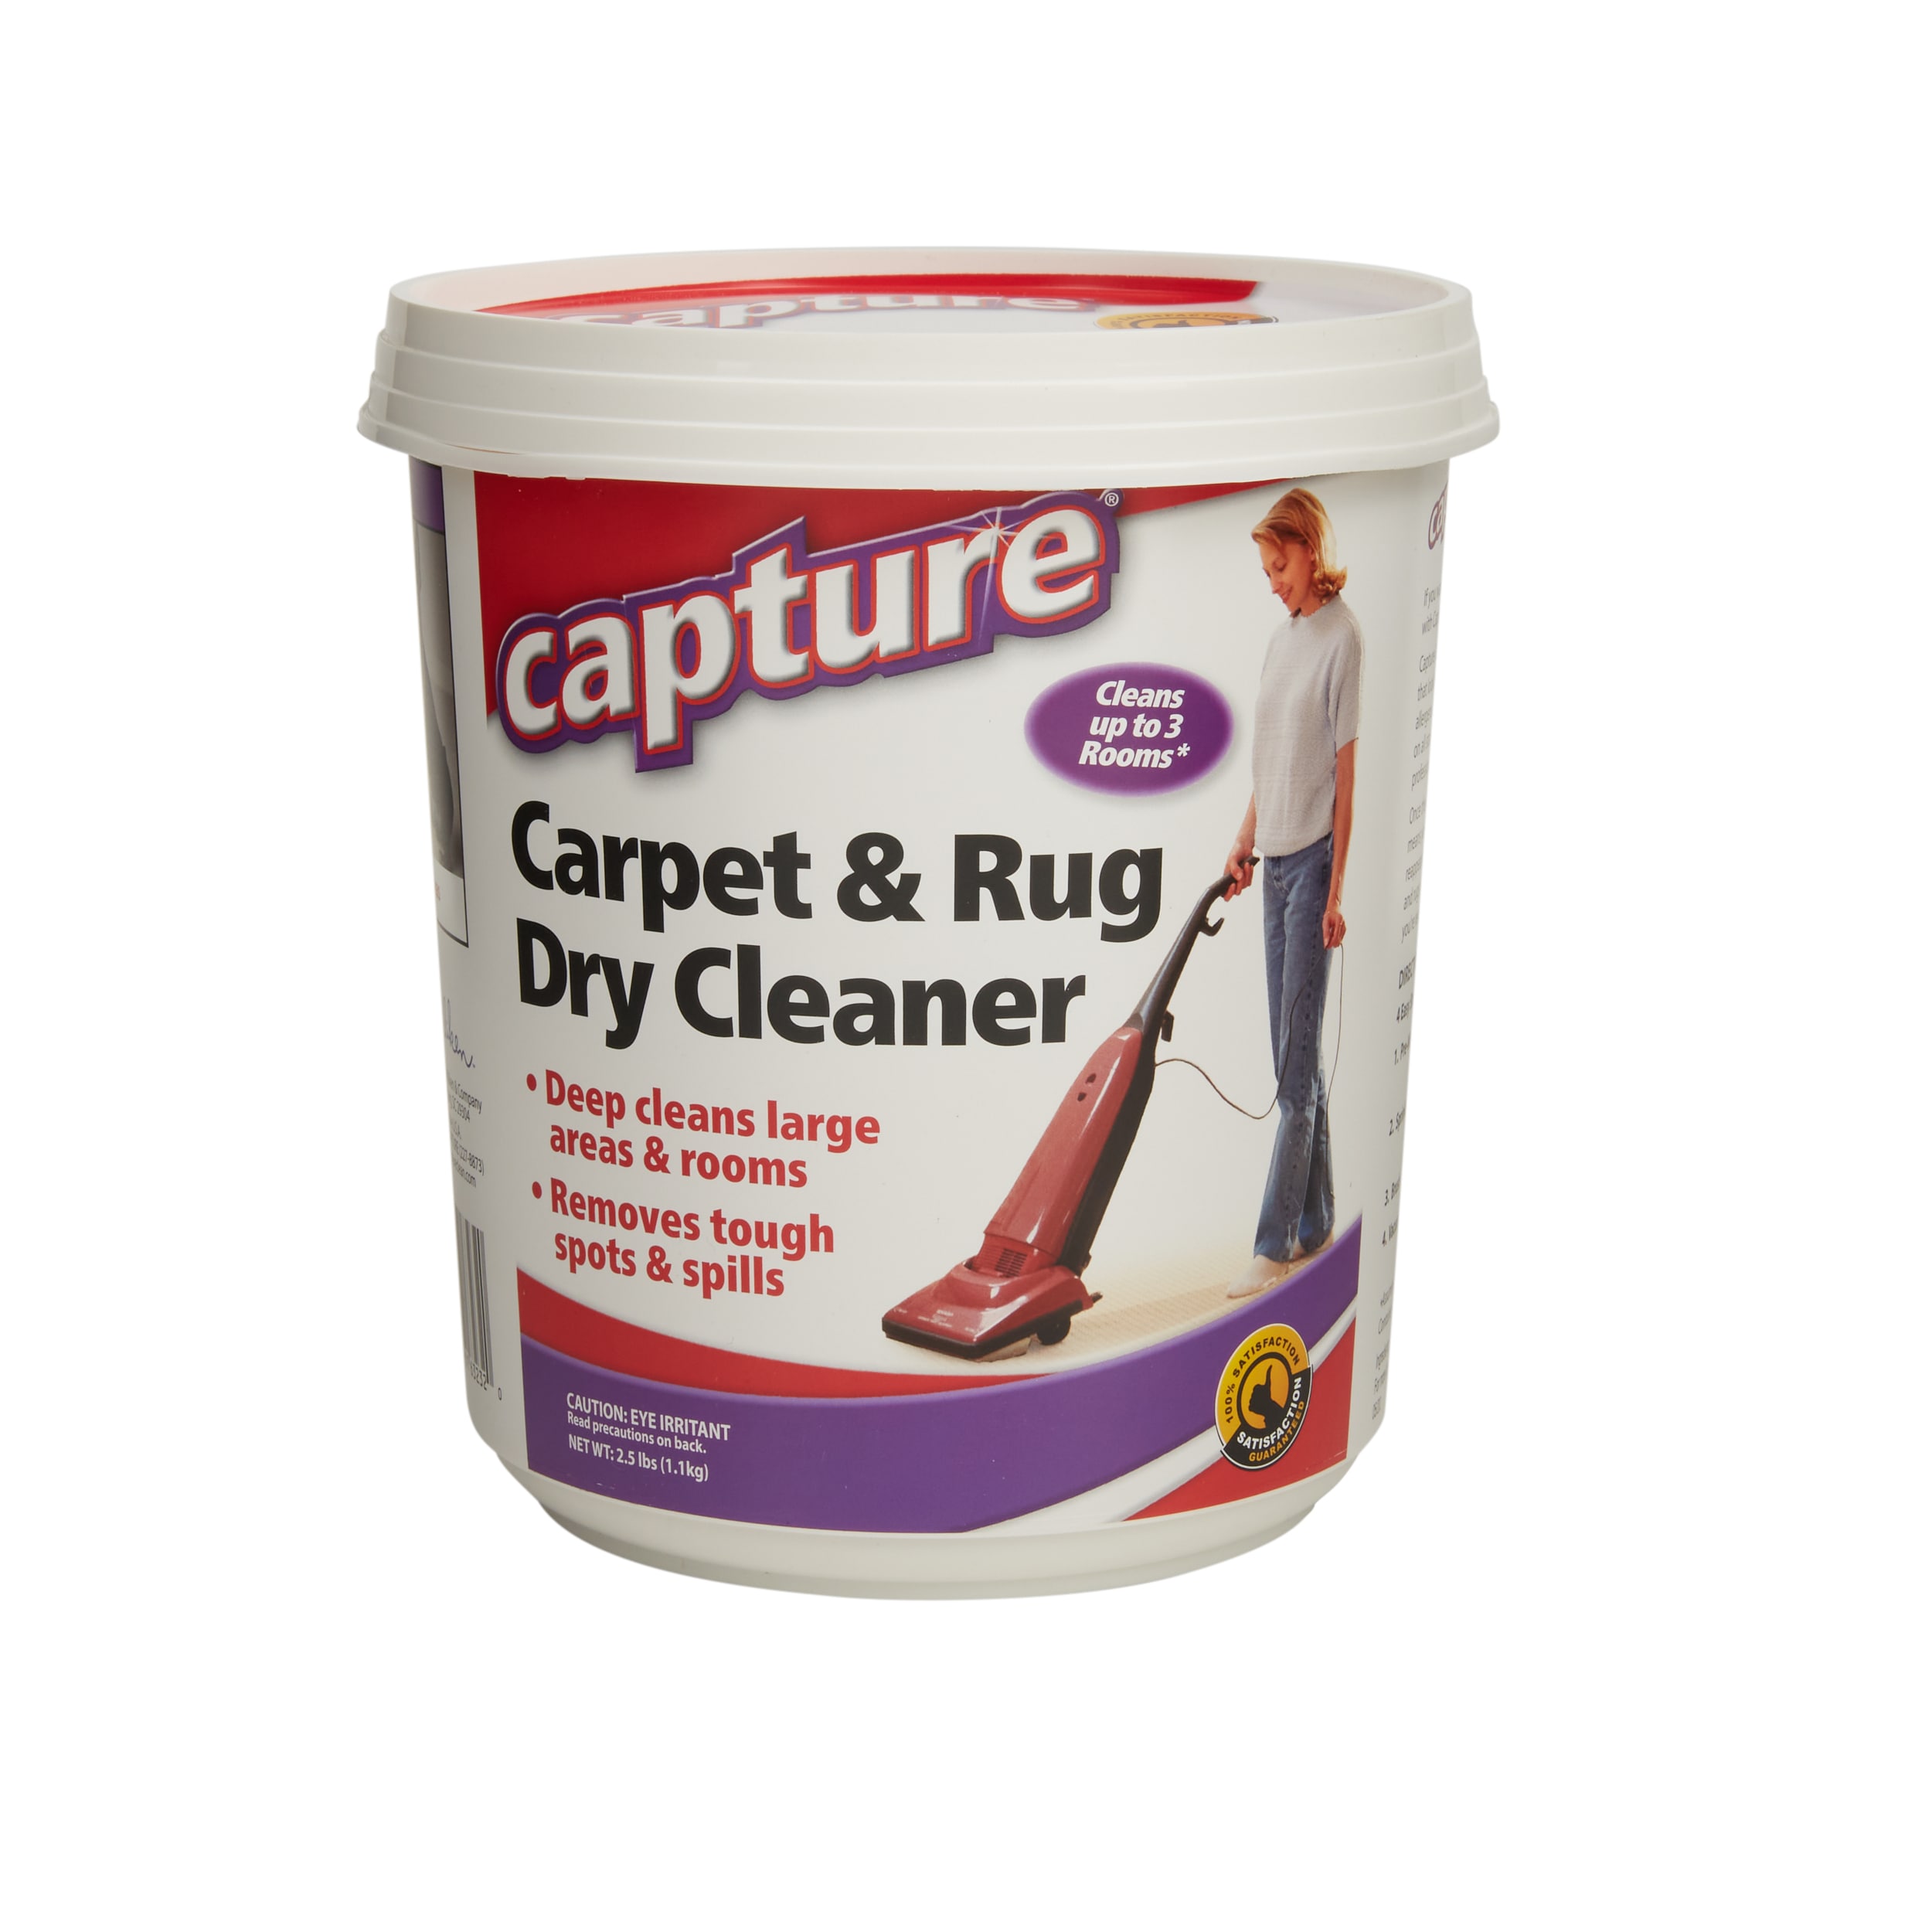 How To Dry Clean Your Carpets Yourself - DIY Carpet Cleaning